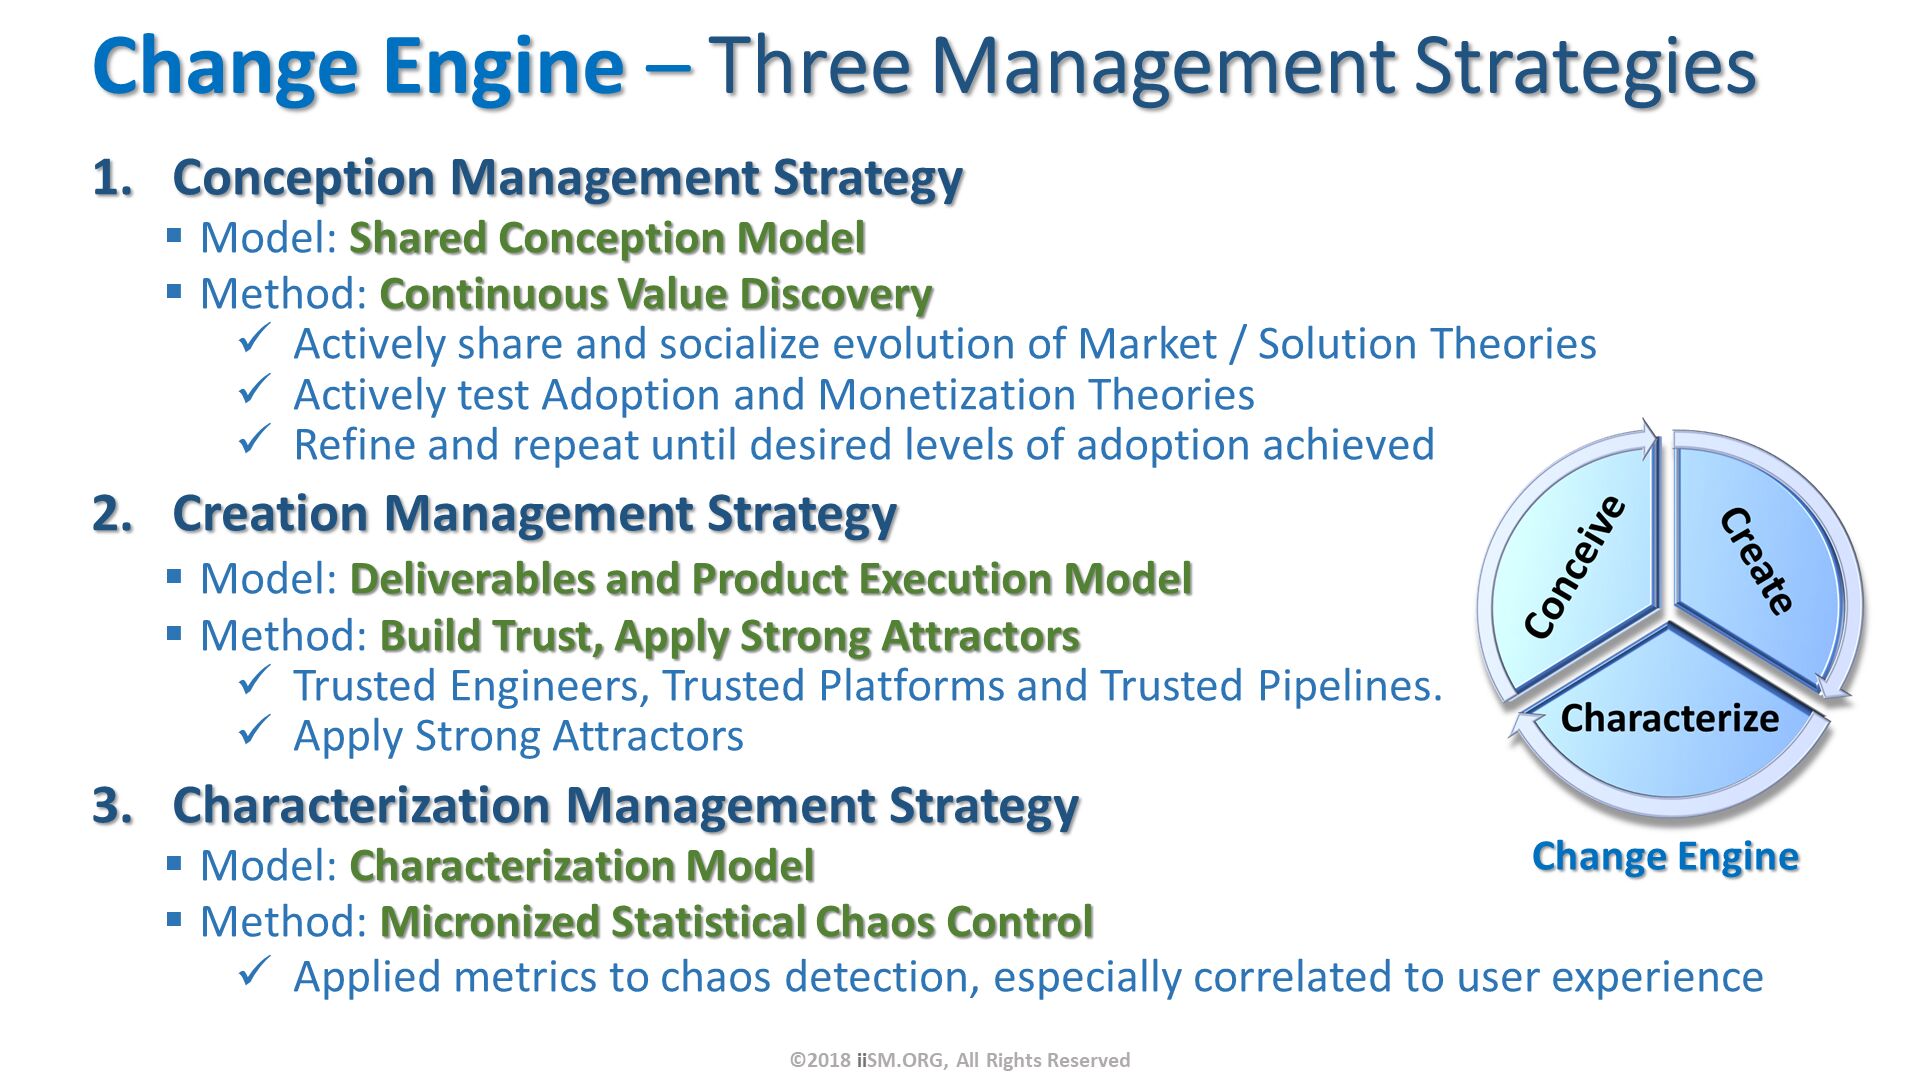 Change Engine – Three Management Strategies. Conception Management Strategy
Model: Shared Conception Model
Method: Continuous Value Discovery
Actively share and socialize evolution of Market / Solution Theories
Actively test Adoption and Monetization Theories
Refine and repeat until desired levels of adoption achieved
Creation Management Strategy
Model: Deliverables and Product Execution Model
Method: Build Trust, Apply Strong Attractors
Trusted Engineers, Trusted Platforms and Trusted Pipelines.
Apply Strong Attractors
Characterization Management Strategy
Model: Characterization Model
Method: Micronized Statistical Chaos Control
Applied metrics to chaos detection, especially correlated to user experience. ©2018 iiSM.ORG, All Rights Reserved. 